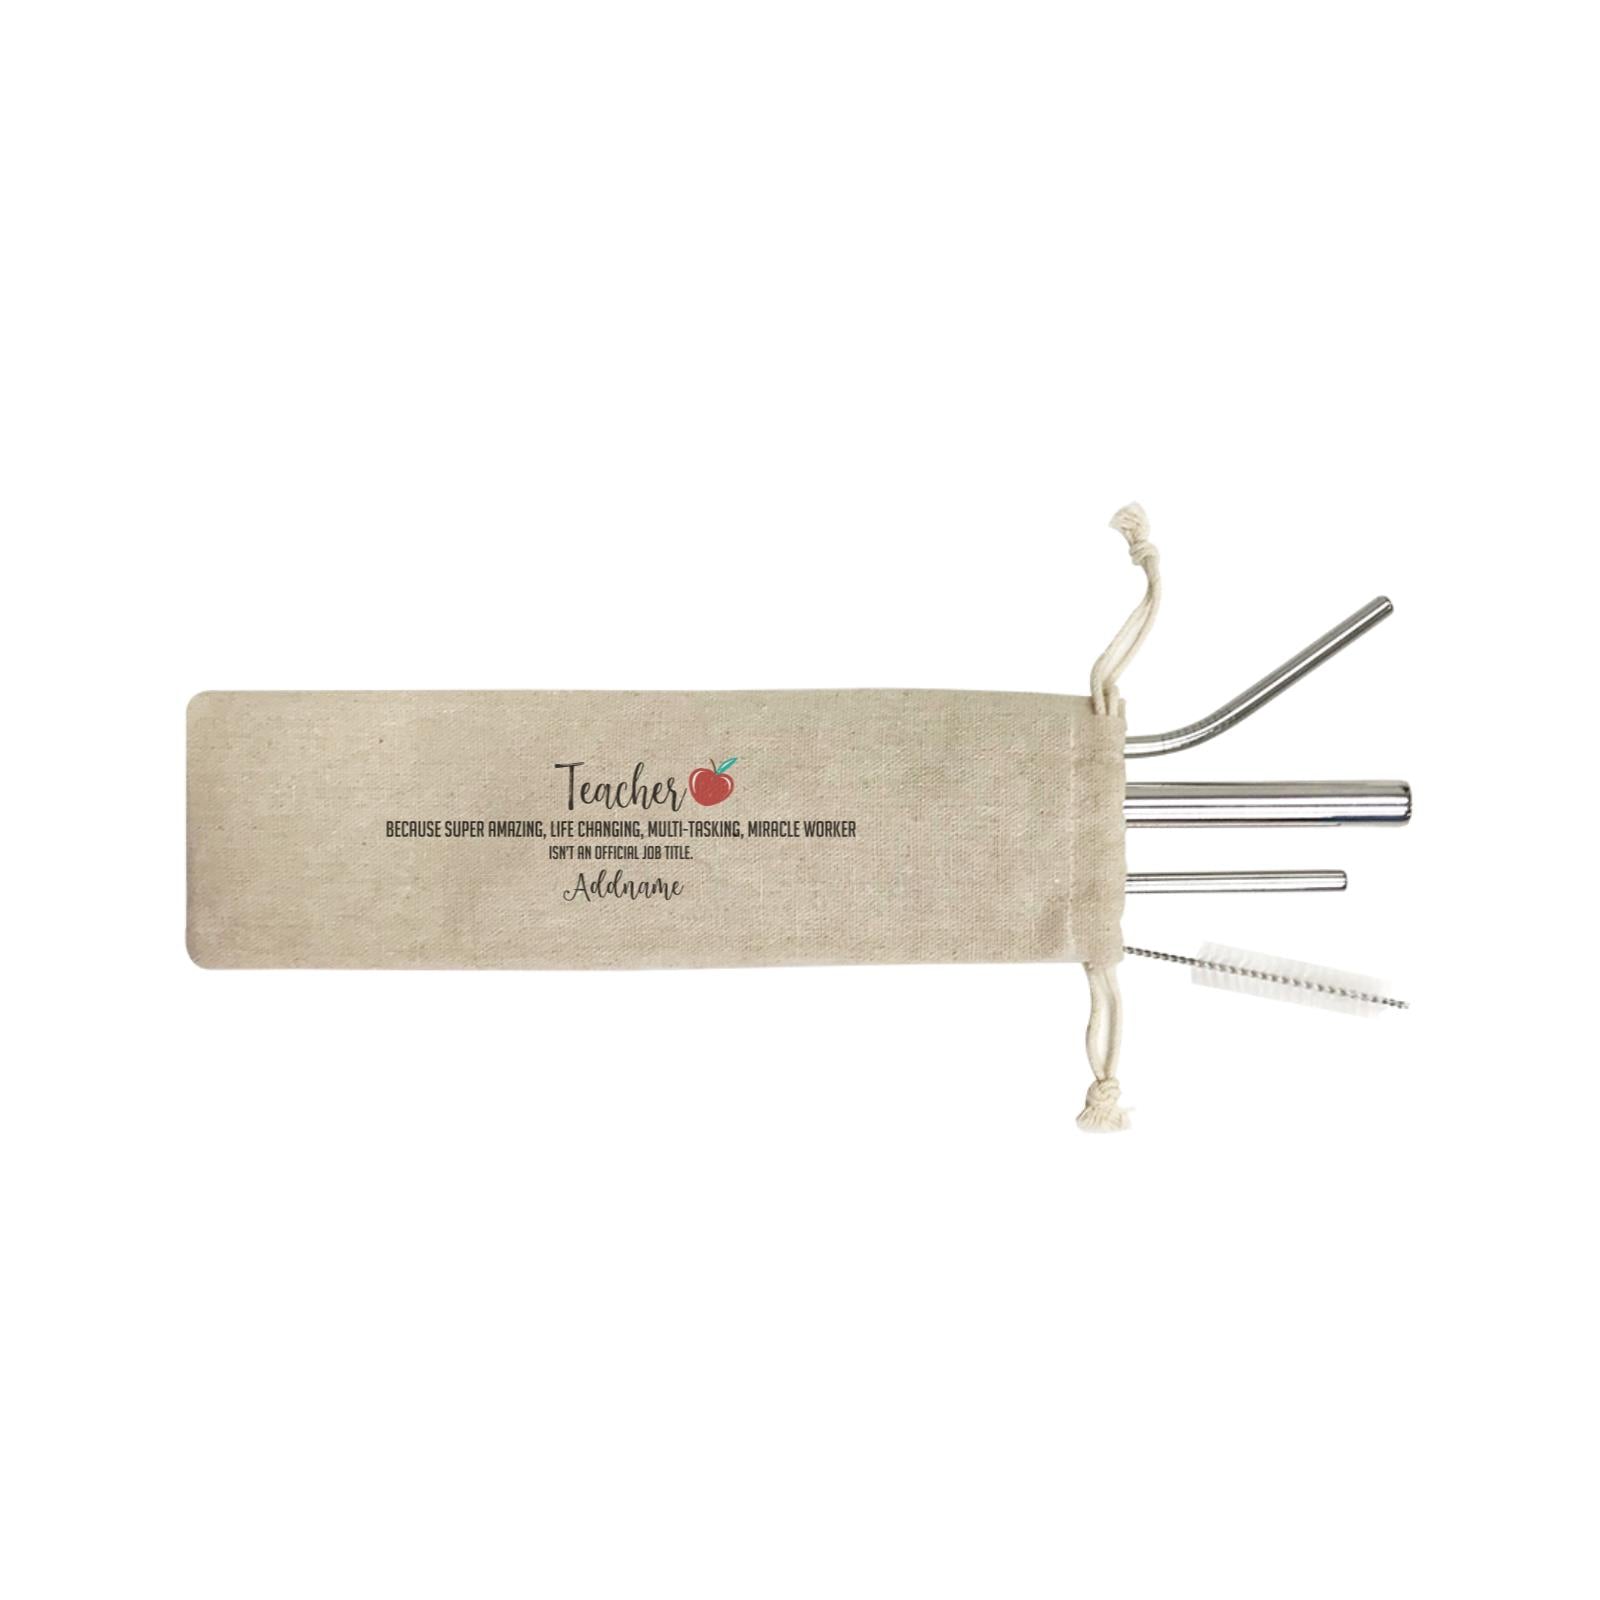 Teacher Quotes Teacher Miracle Worker Isn't An Official Job Title Addname SB 4-In-1 Stainless Steel Straw Set in Satchel